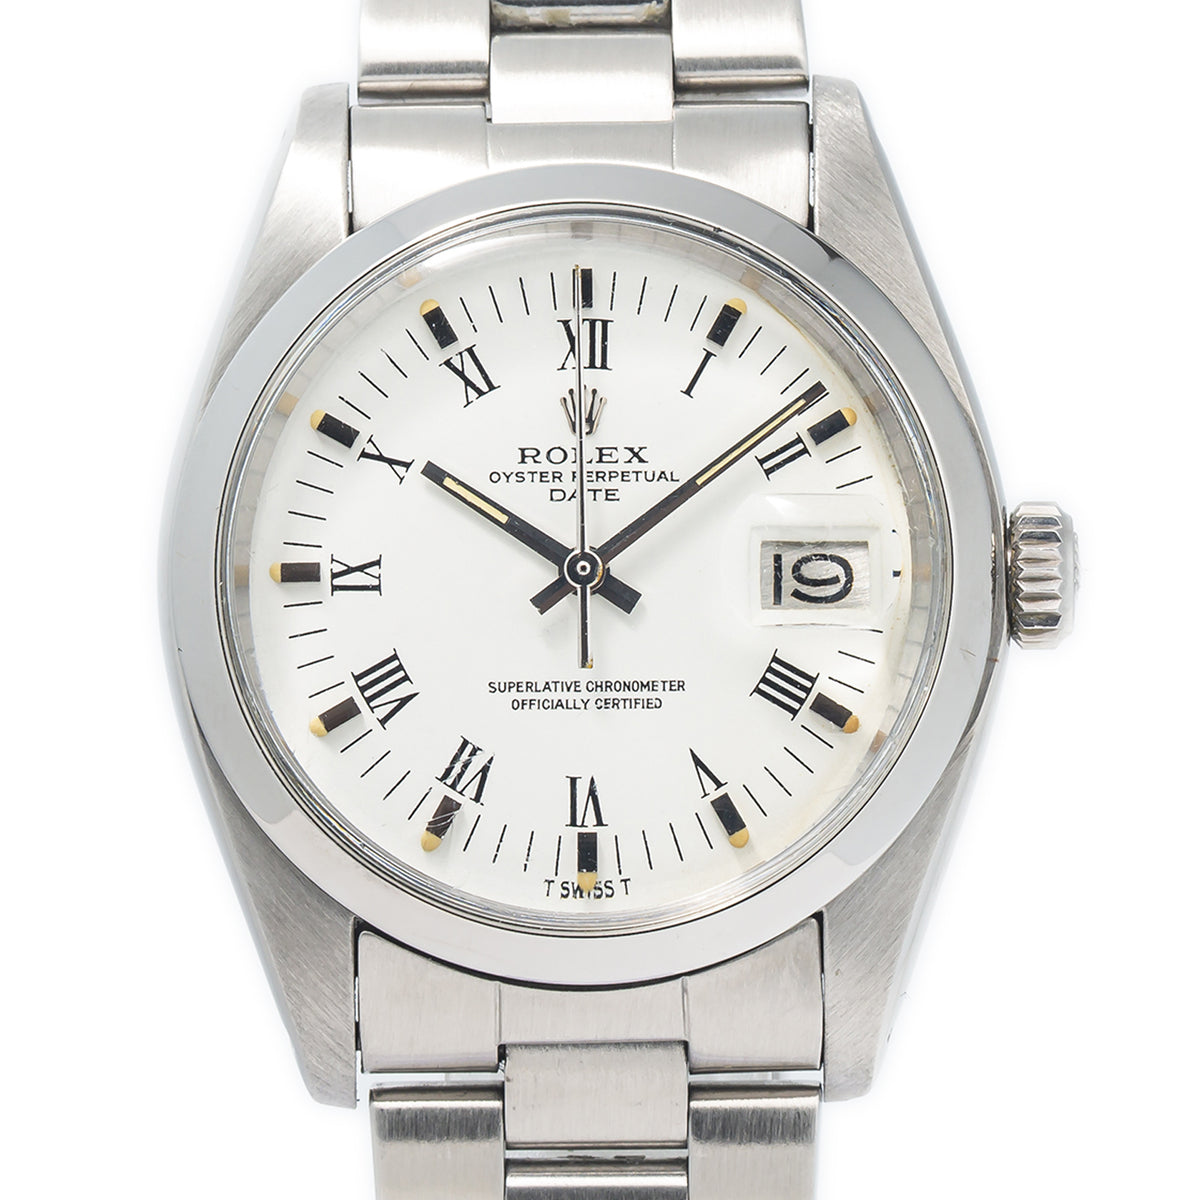 Rolex Oyster Perpetual Date 1500 Stainless Steel Roman White Dial Watch 34mm